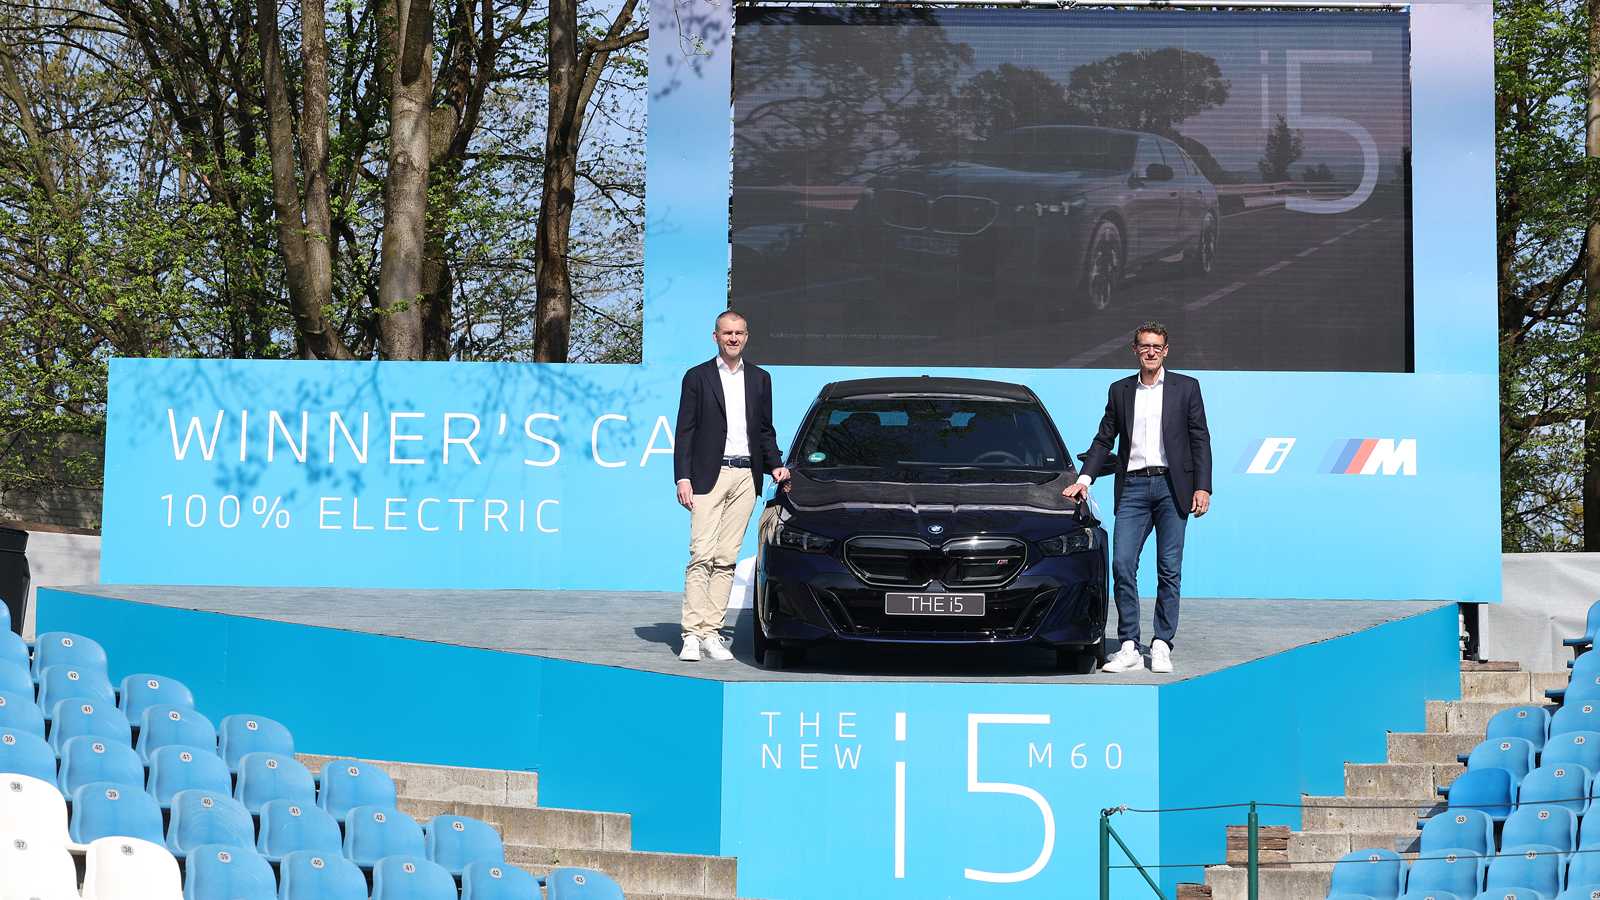 A true Bavarian for the BMW Open champion: presentation of the all-electric Winner’s Car BMW i5 M60.